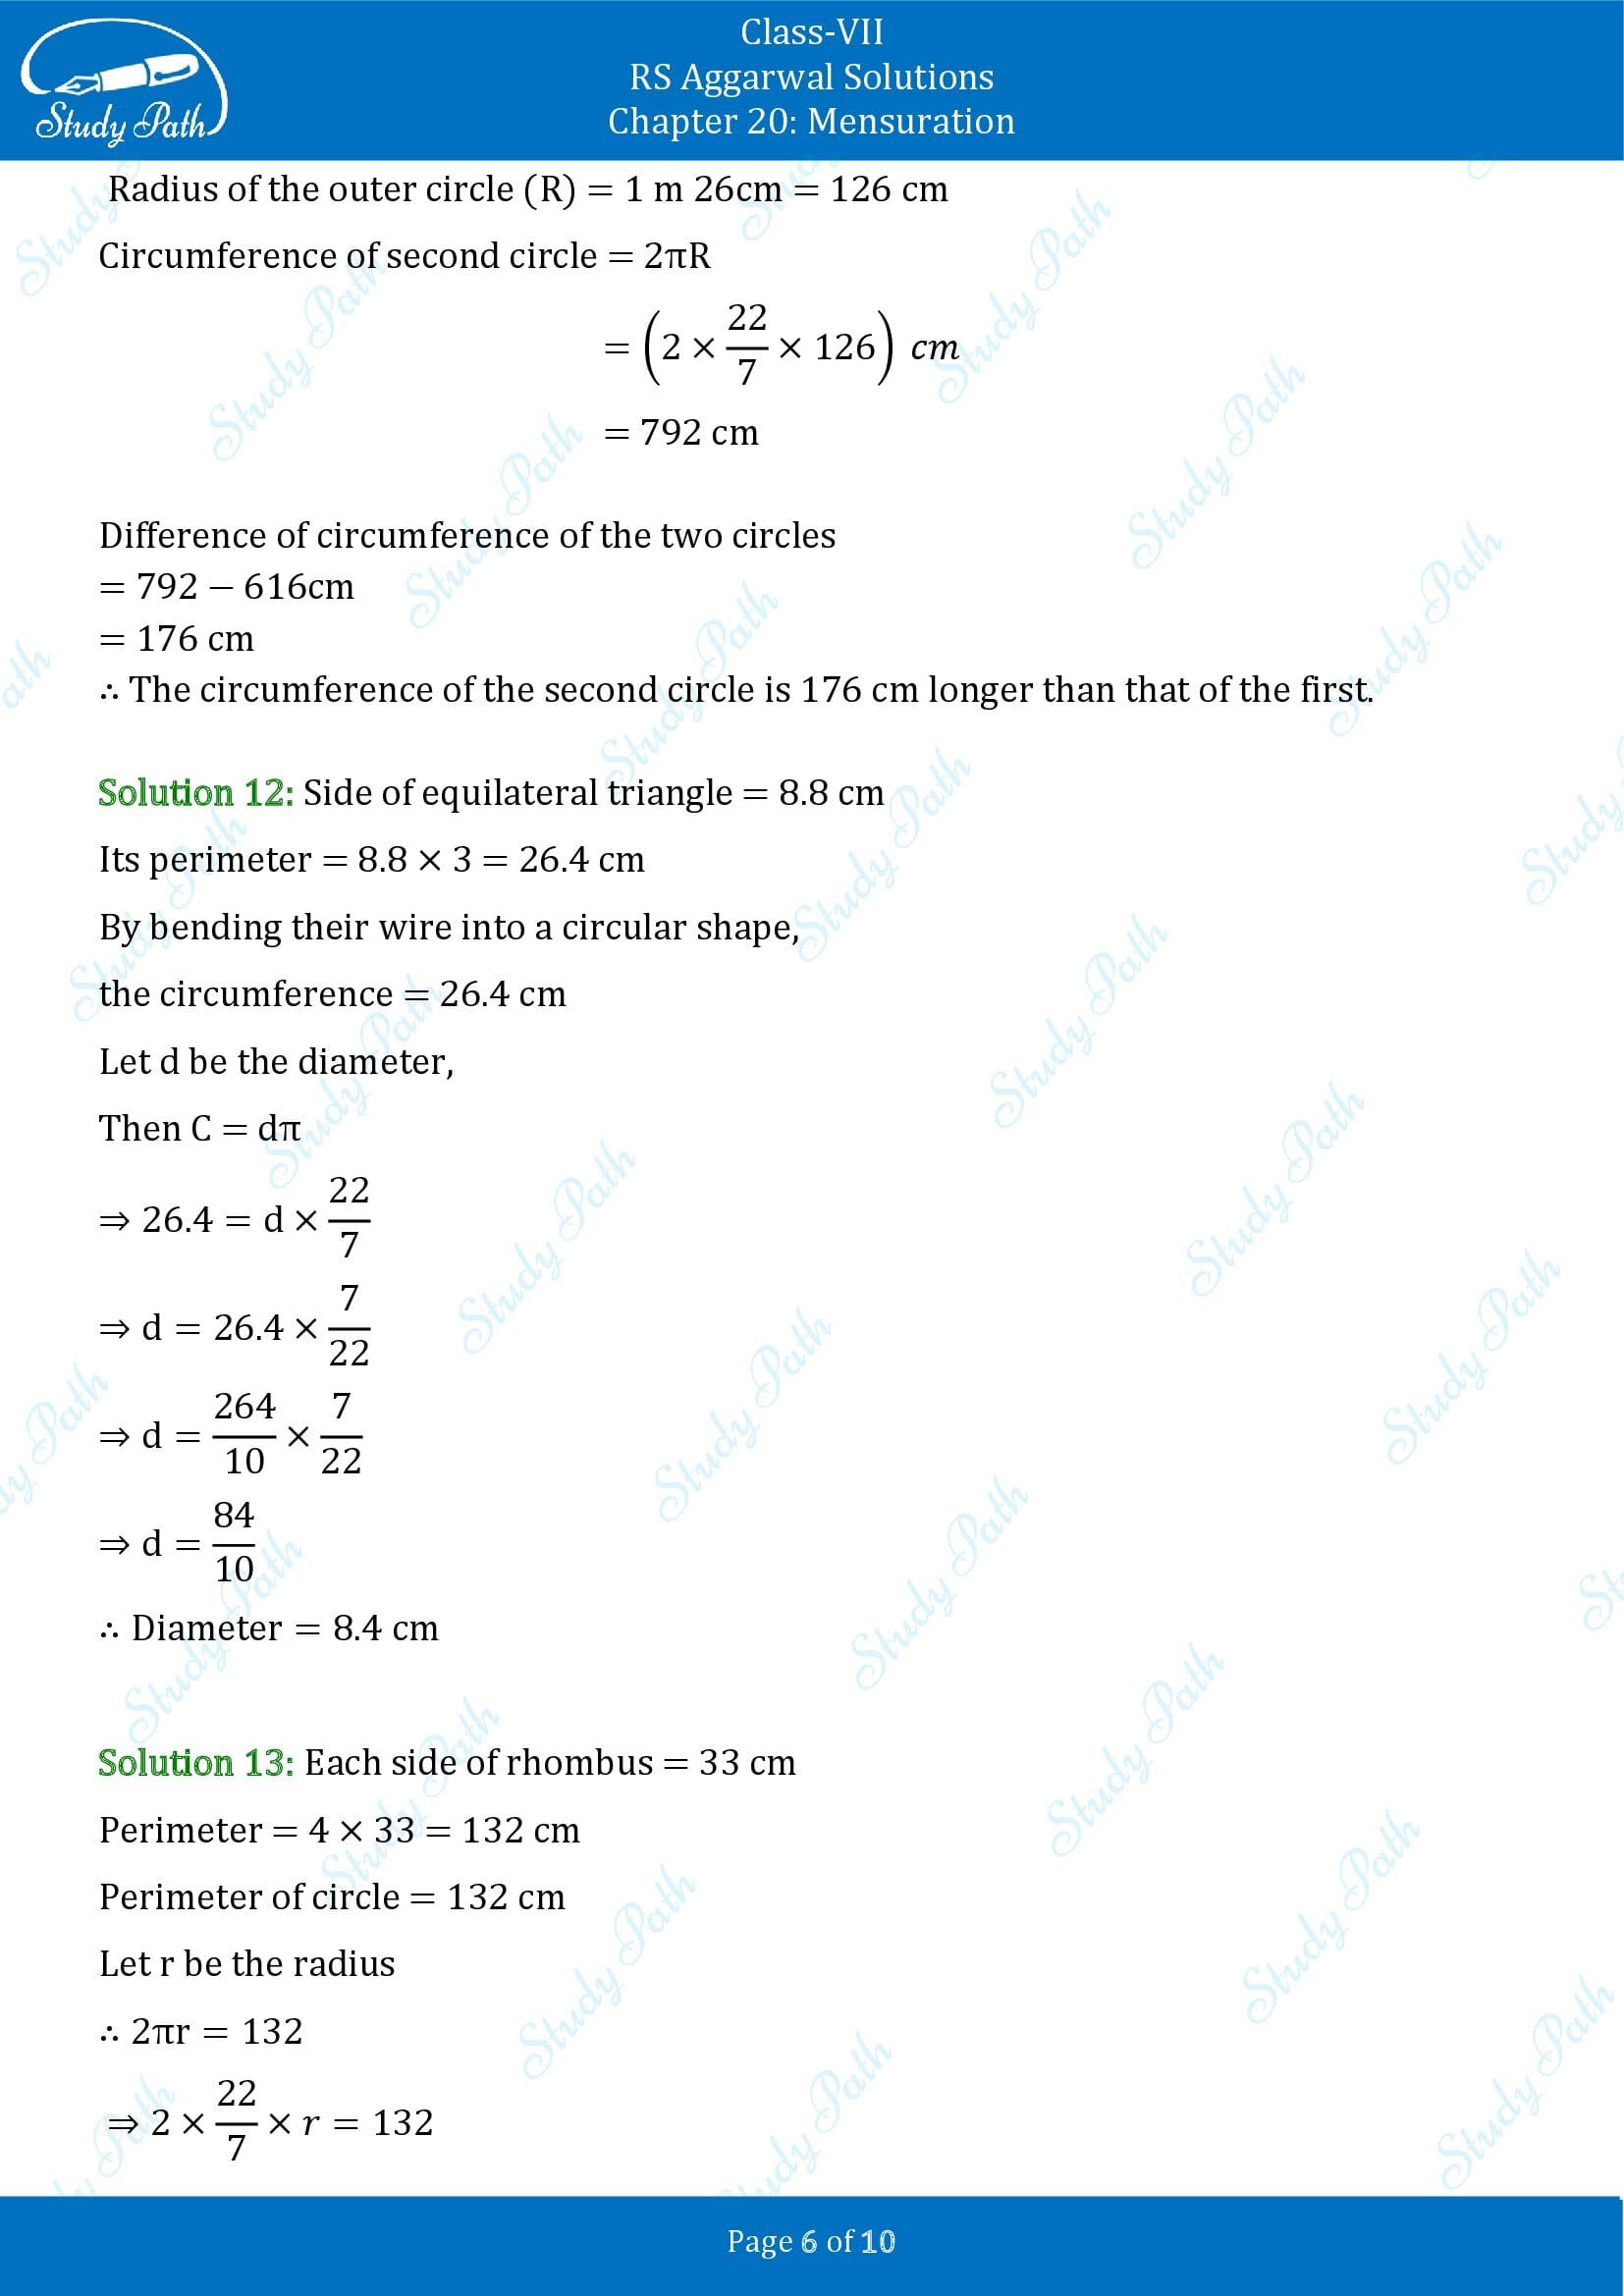 RS Aggarwal Solutions Class 7 Chapter 20 Mensuration Exercise 20E 00006